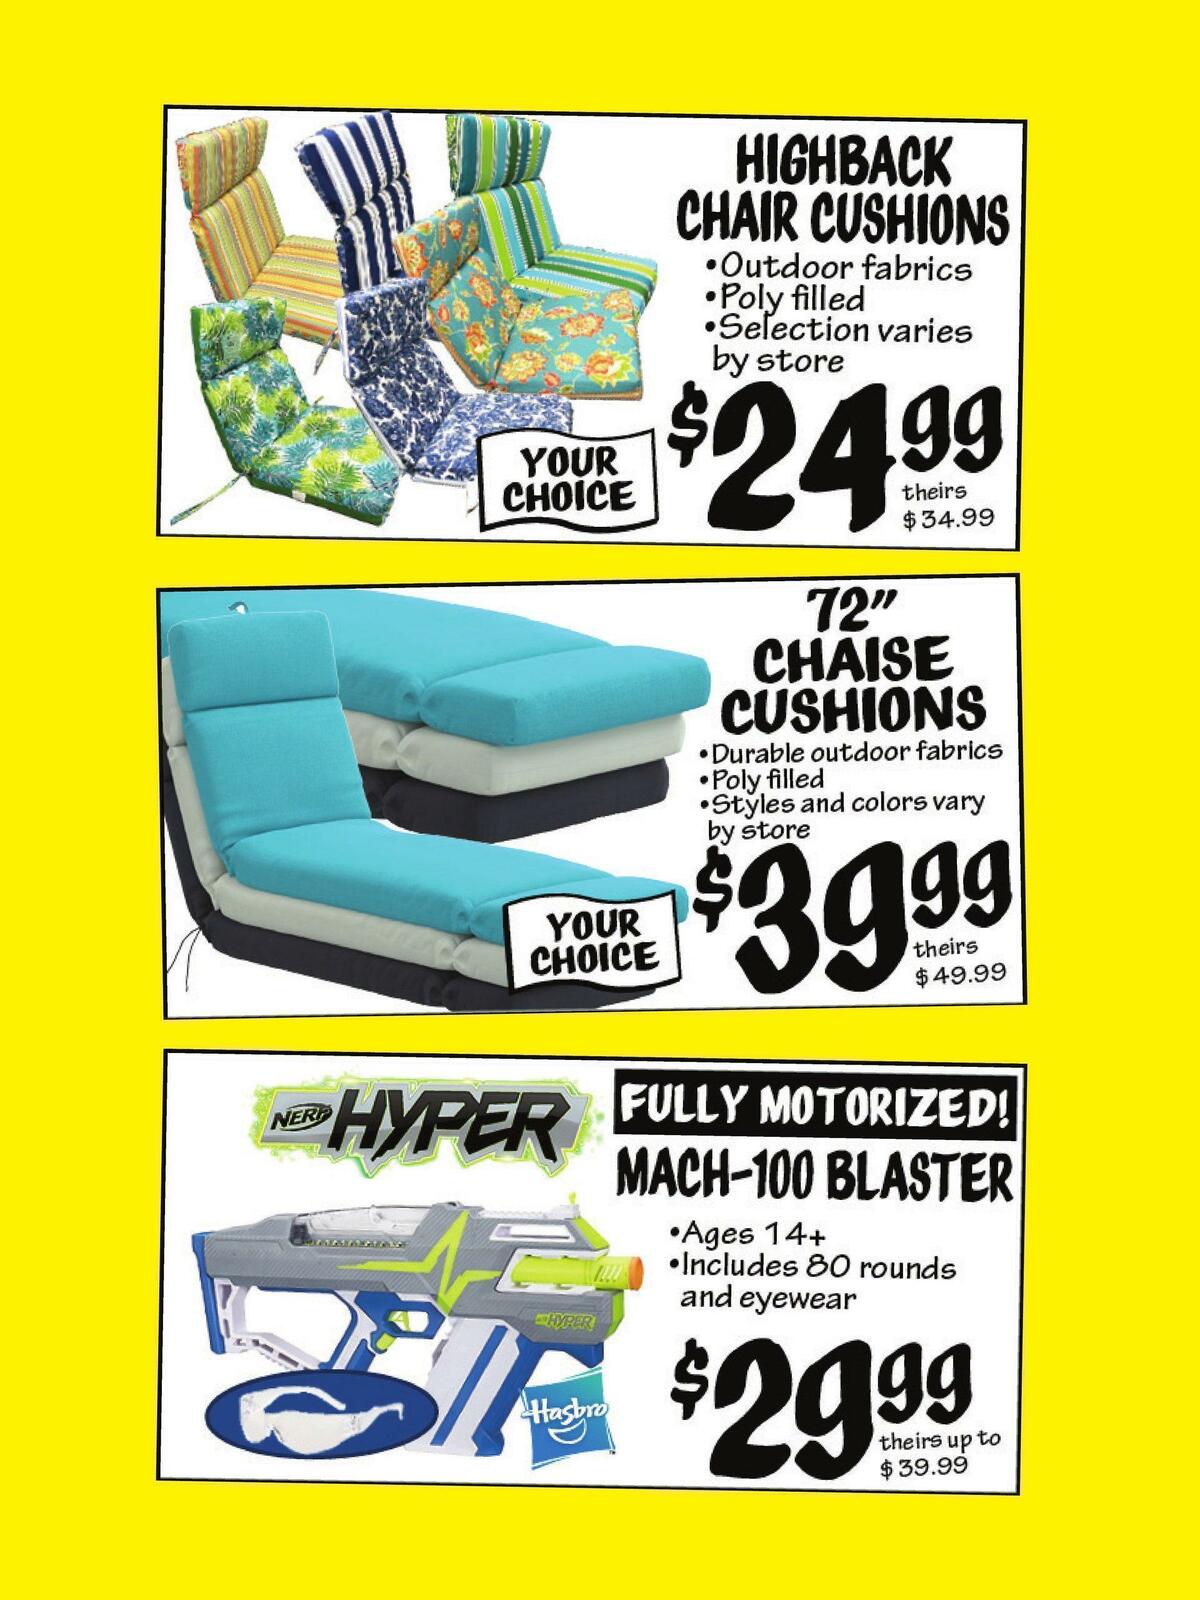 Ollie's Bargain Outlet Weekly Ad from June 7